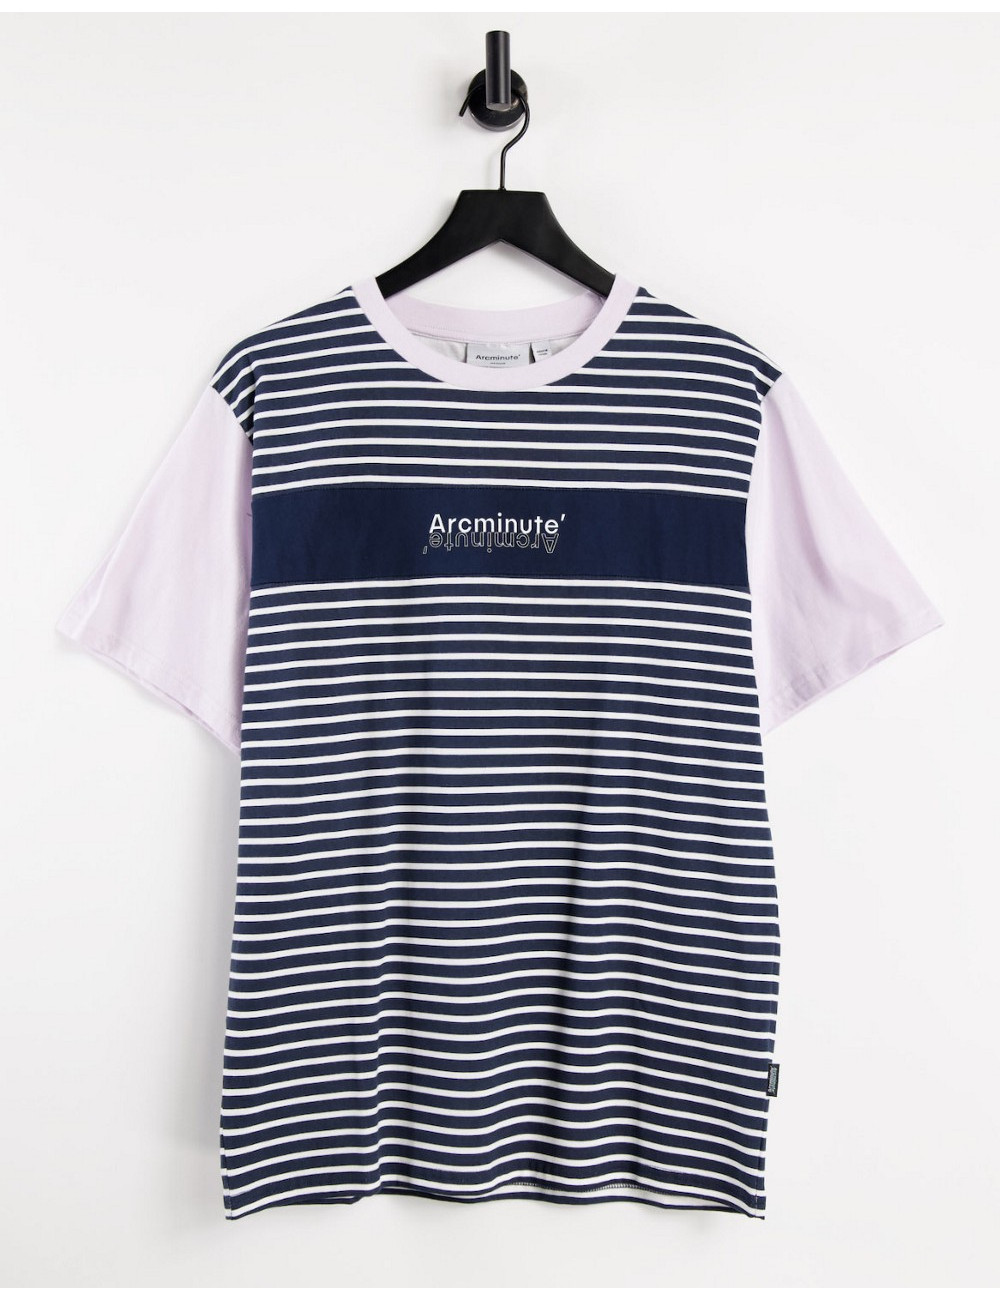 Arcminute striped co-ord...